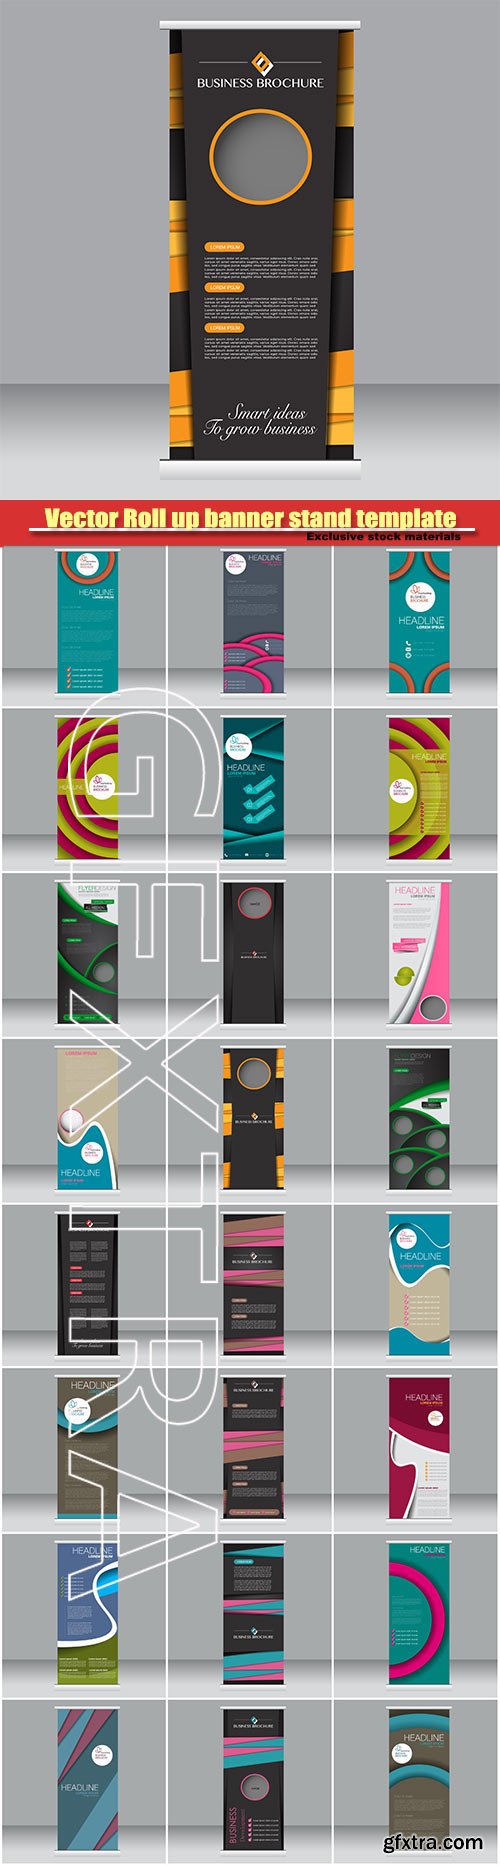 Vector Roll up banner stand template, abstract background for design, business, education, advertisement #5